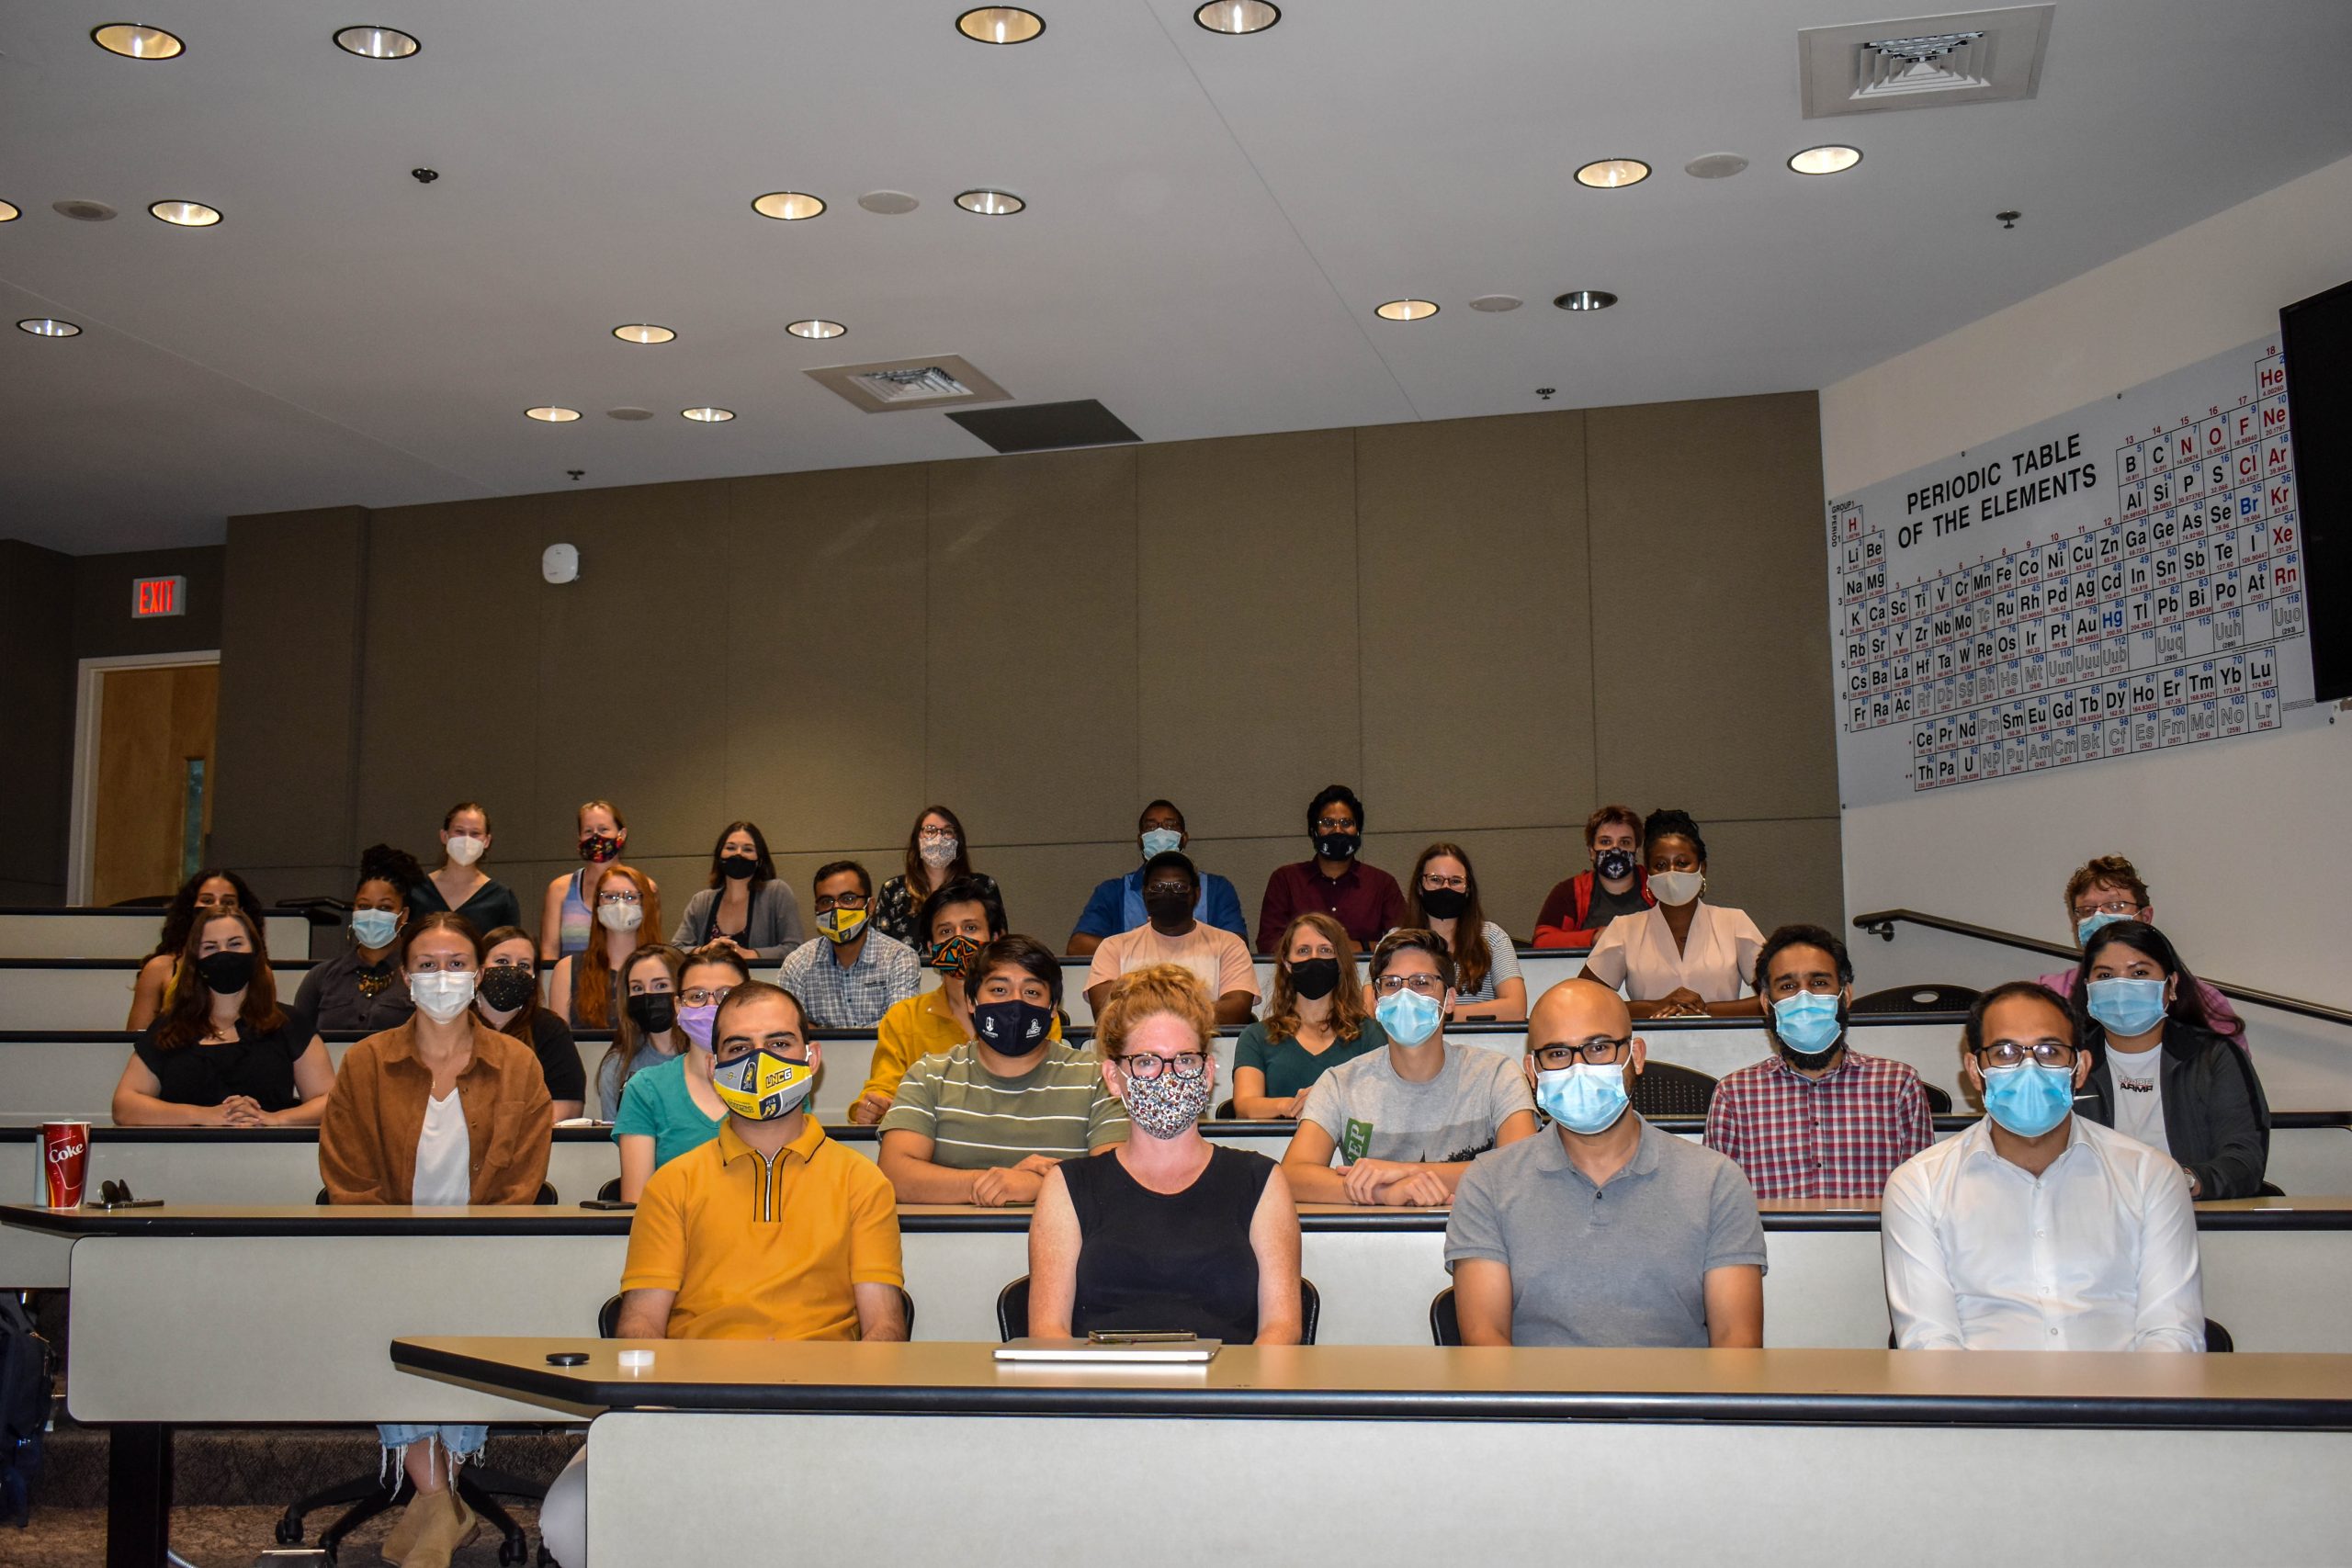 Graduate students sitting in classroom with masks on